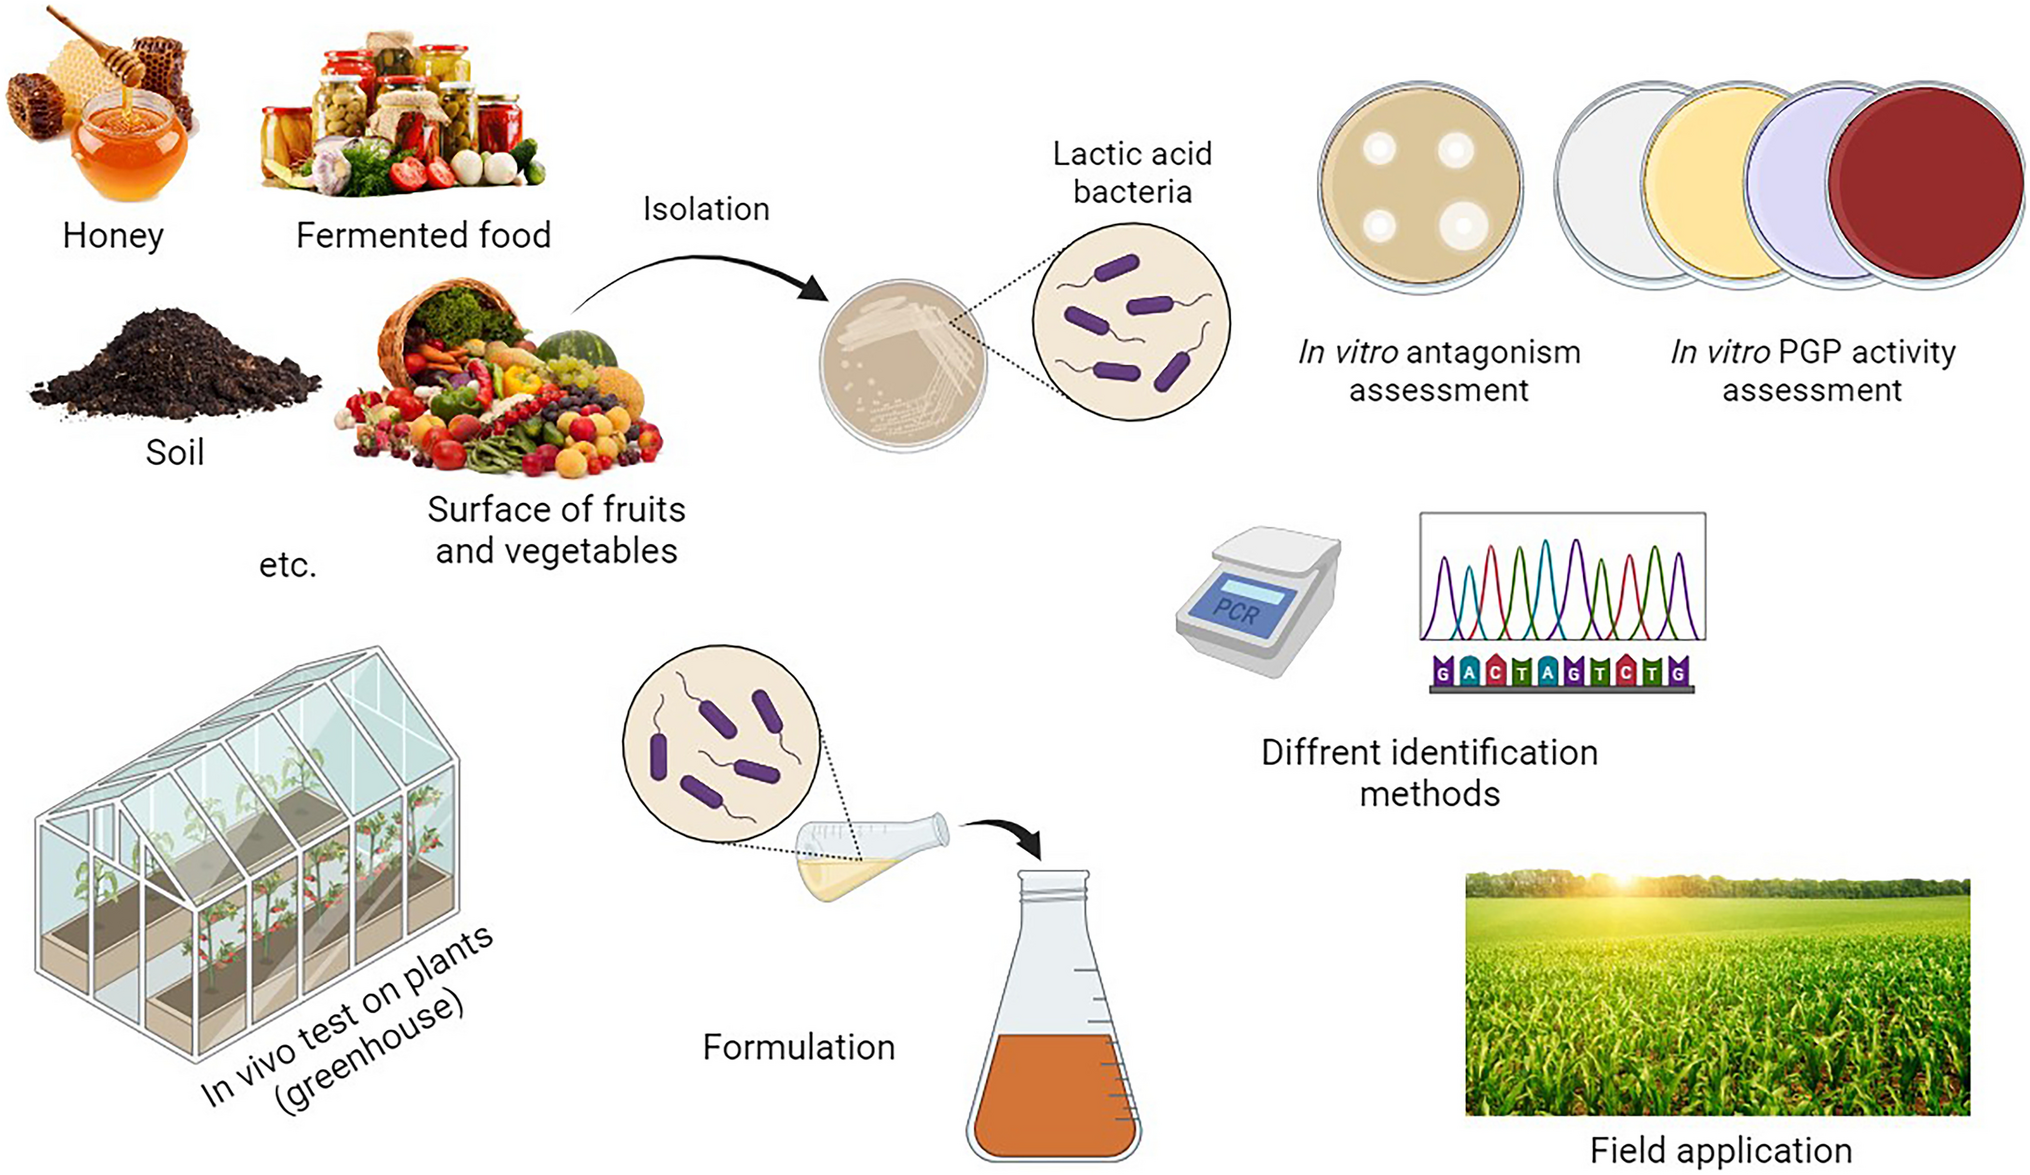 Lactic acid bacteria as an eco-friendly approach in plant production: Current state and prospects